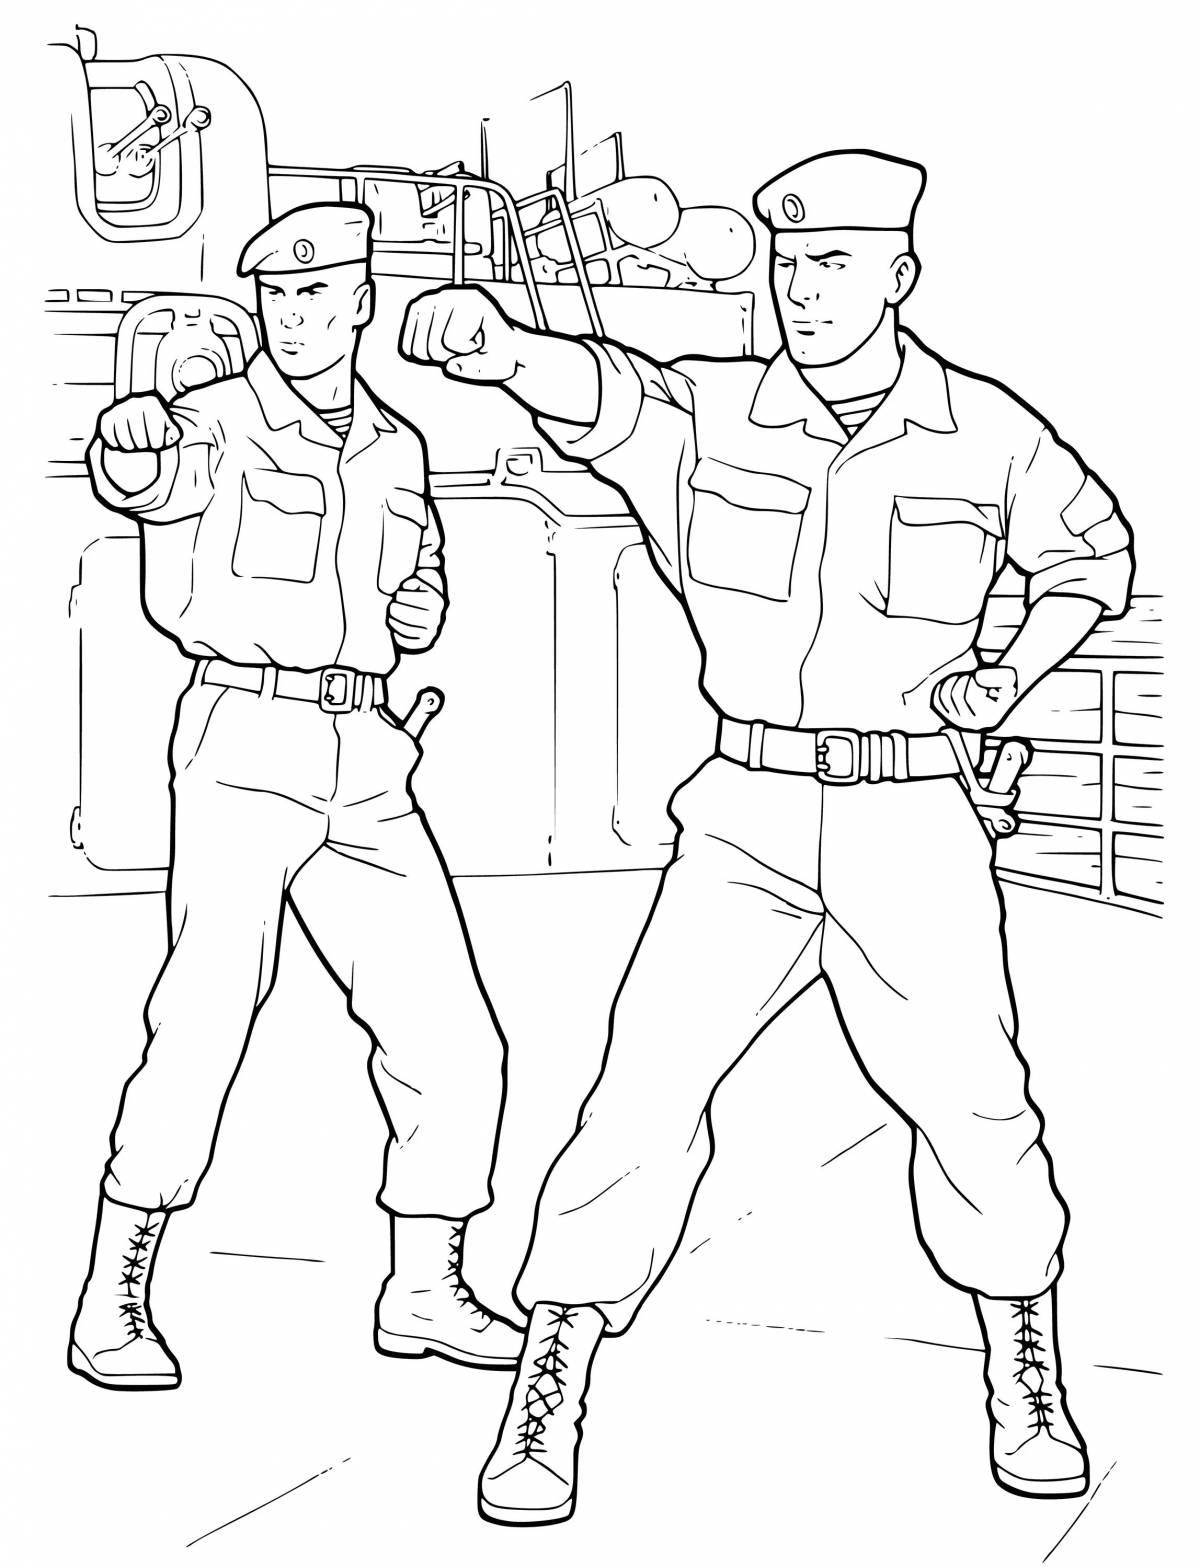 Glorious soldiers of the Russian army coloring page